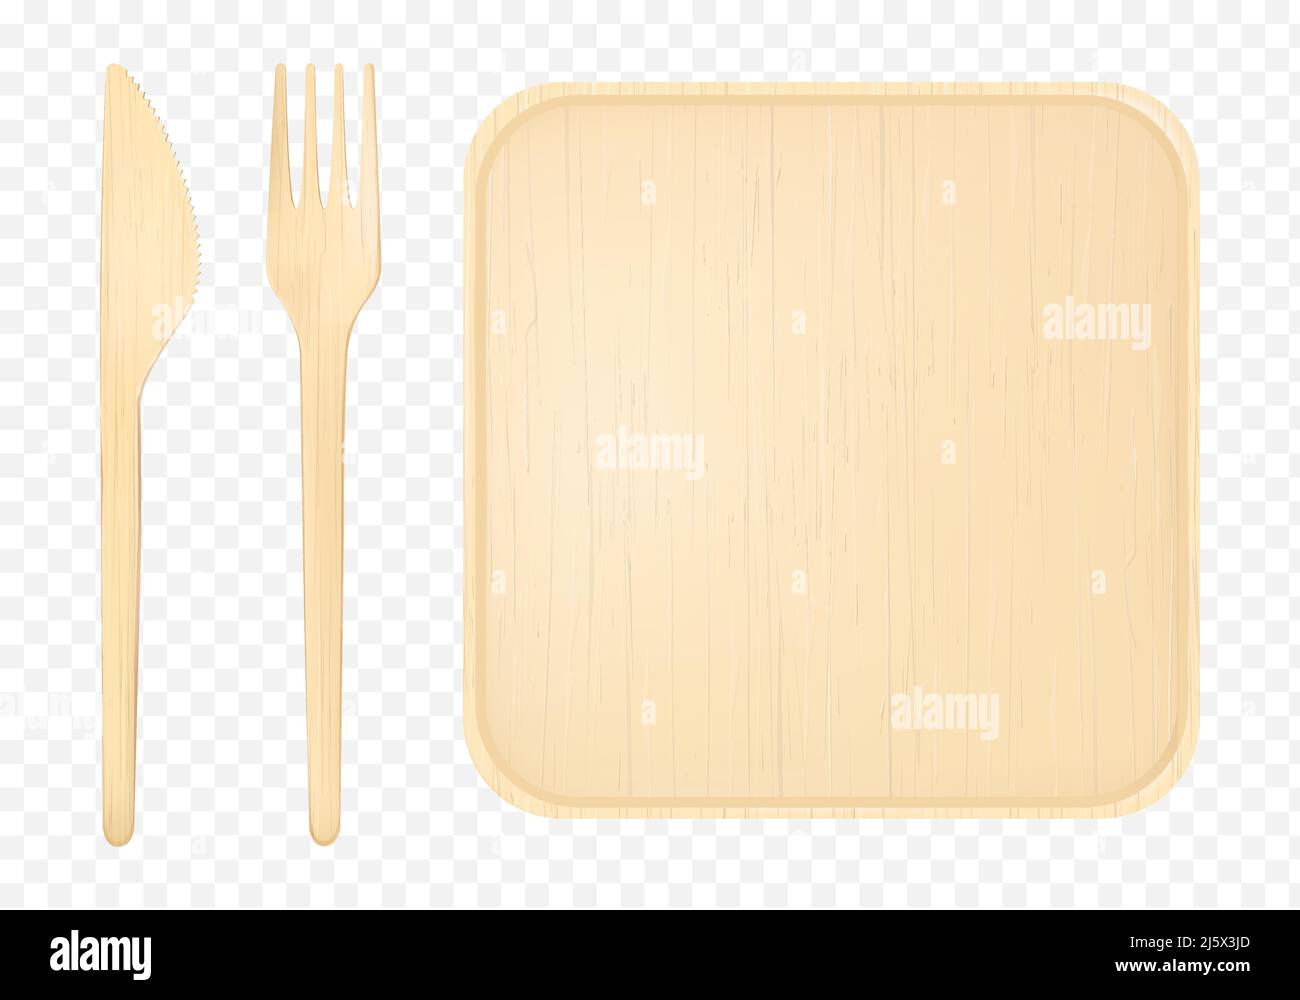 Wooden plate with fork and knife top view, disposable tablewear isolated on background, single use table setting with empty square wood dish natural e Stock Vector